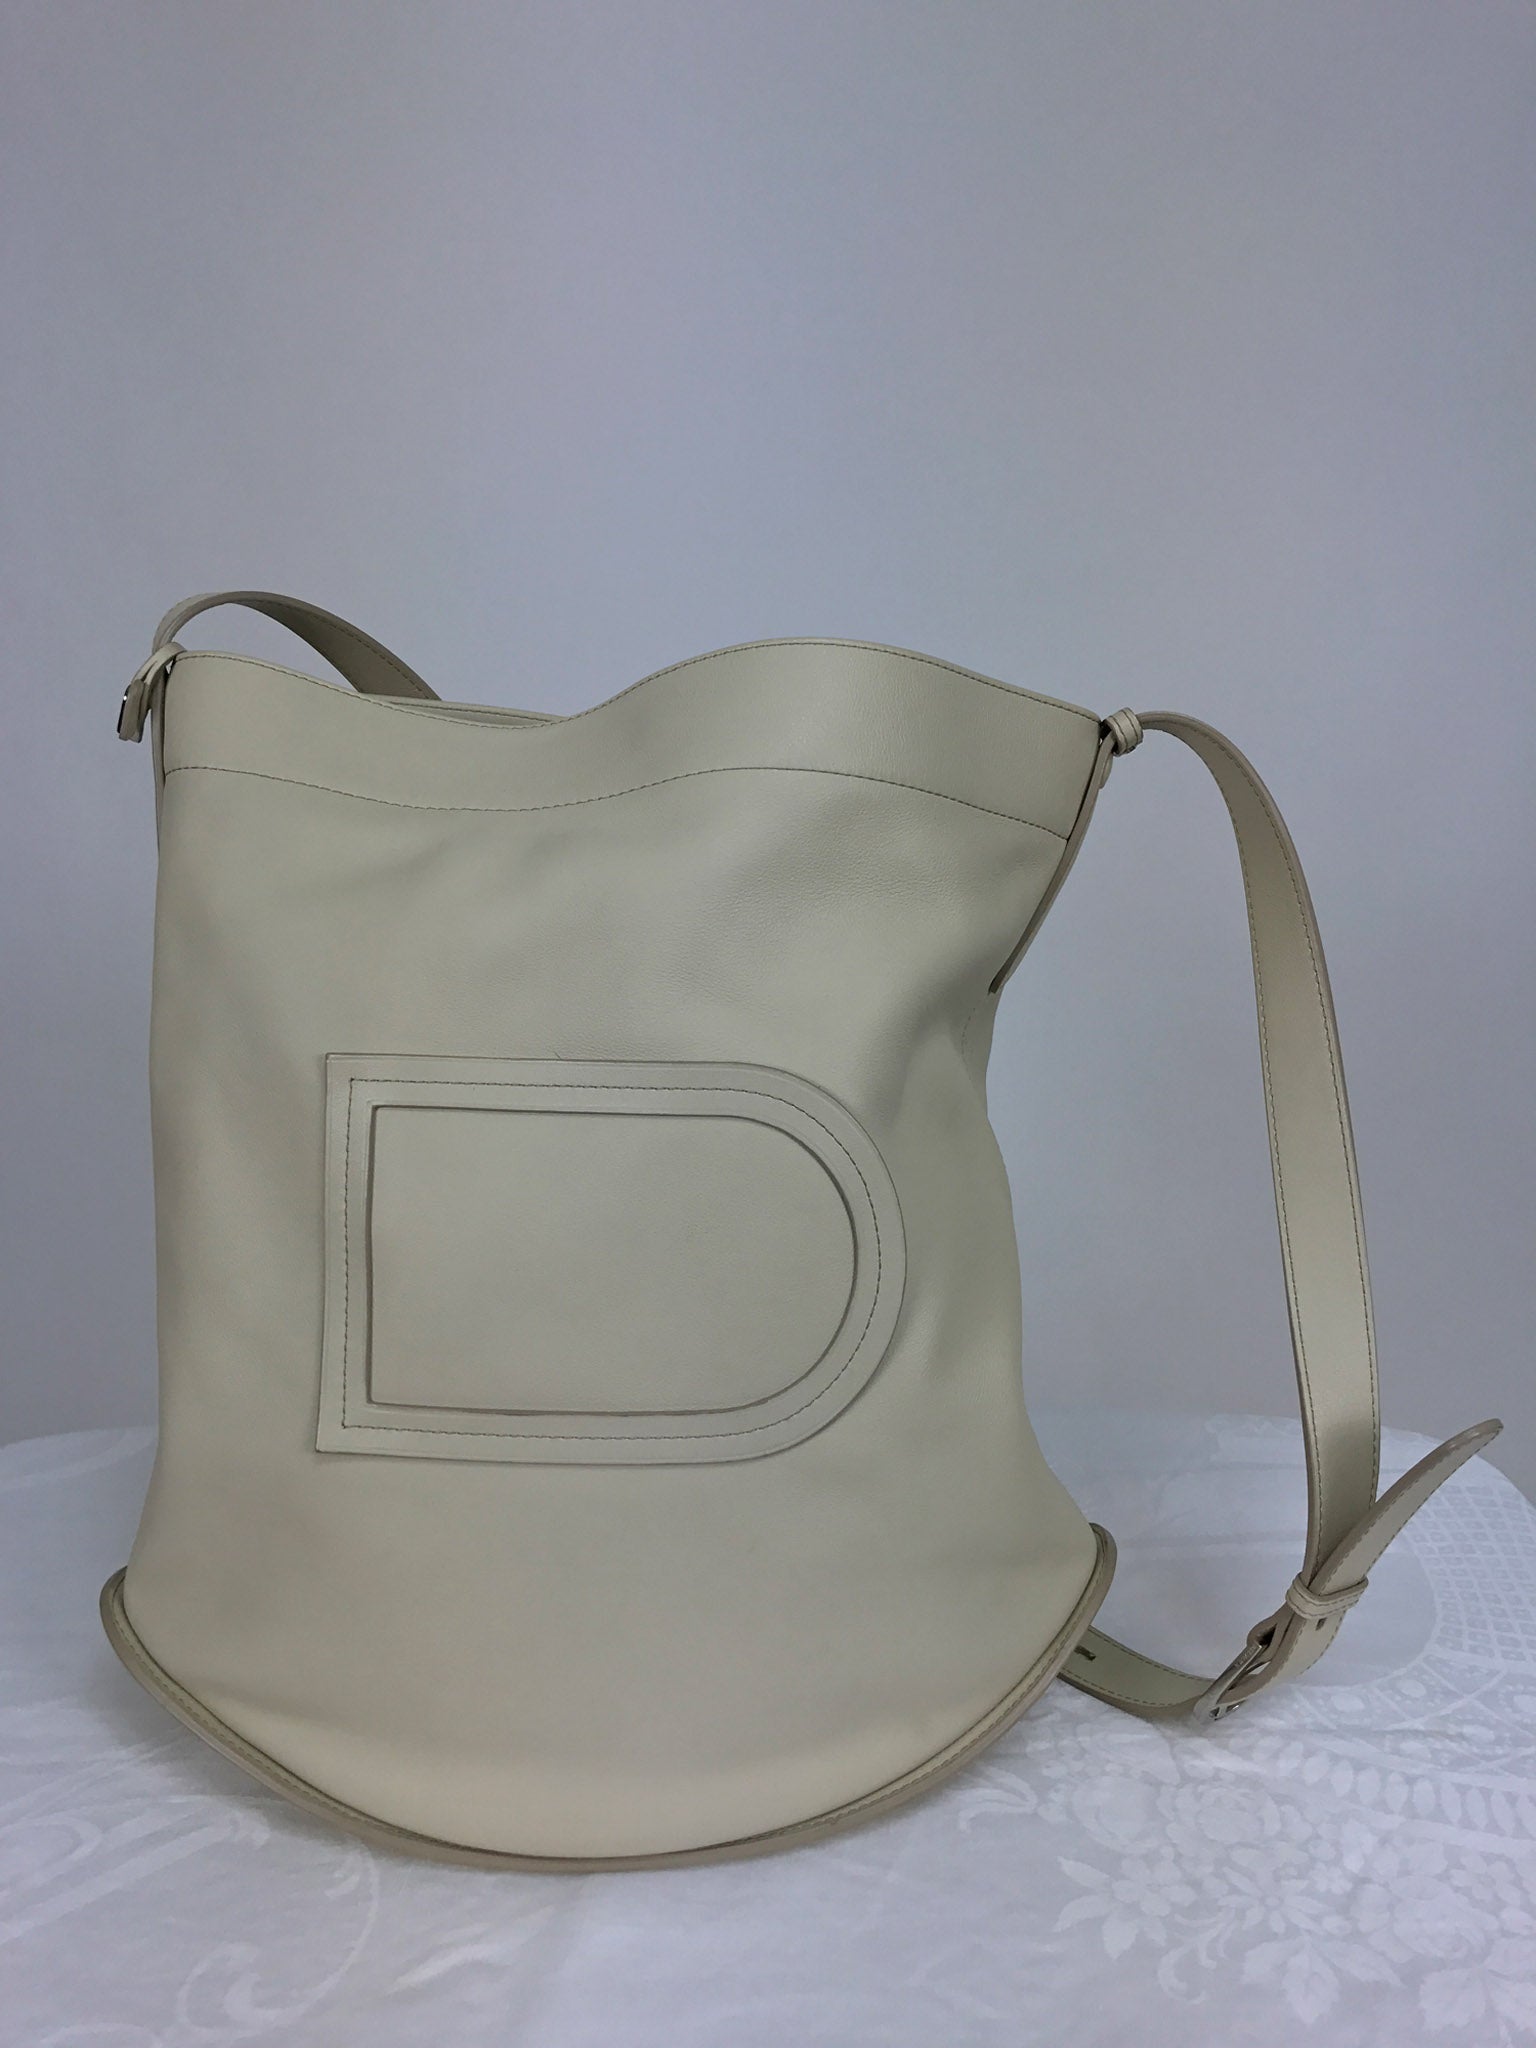 SOLD Delvaux Ivory Leather Pin Holdall Shoulder Bag – Palm Beach Vintage